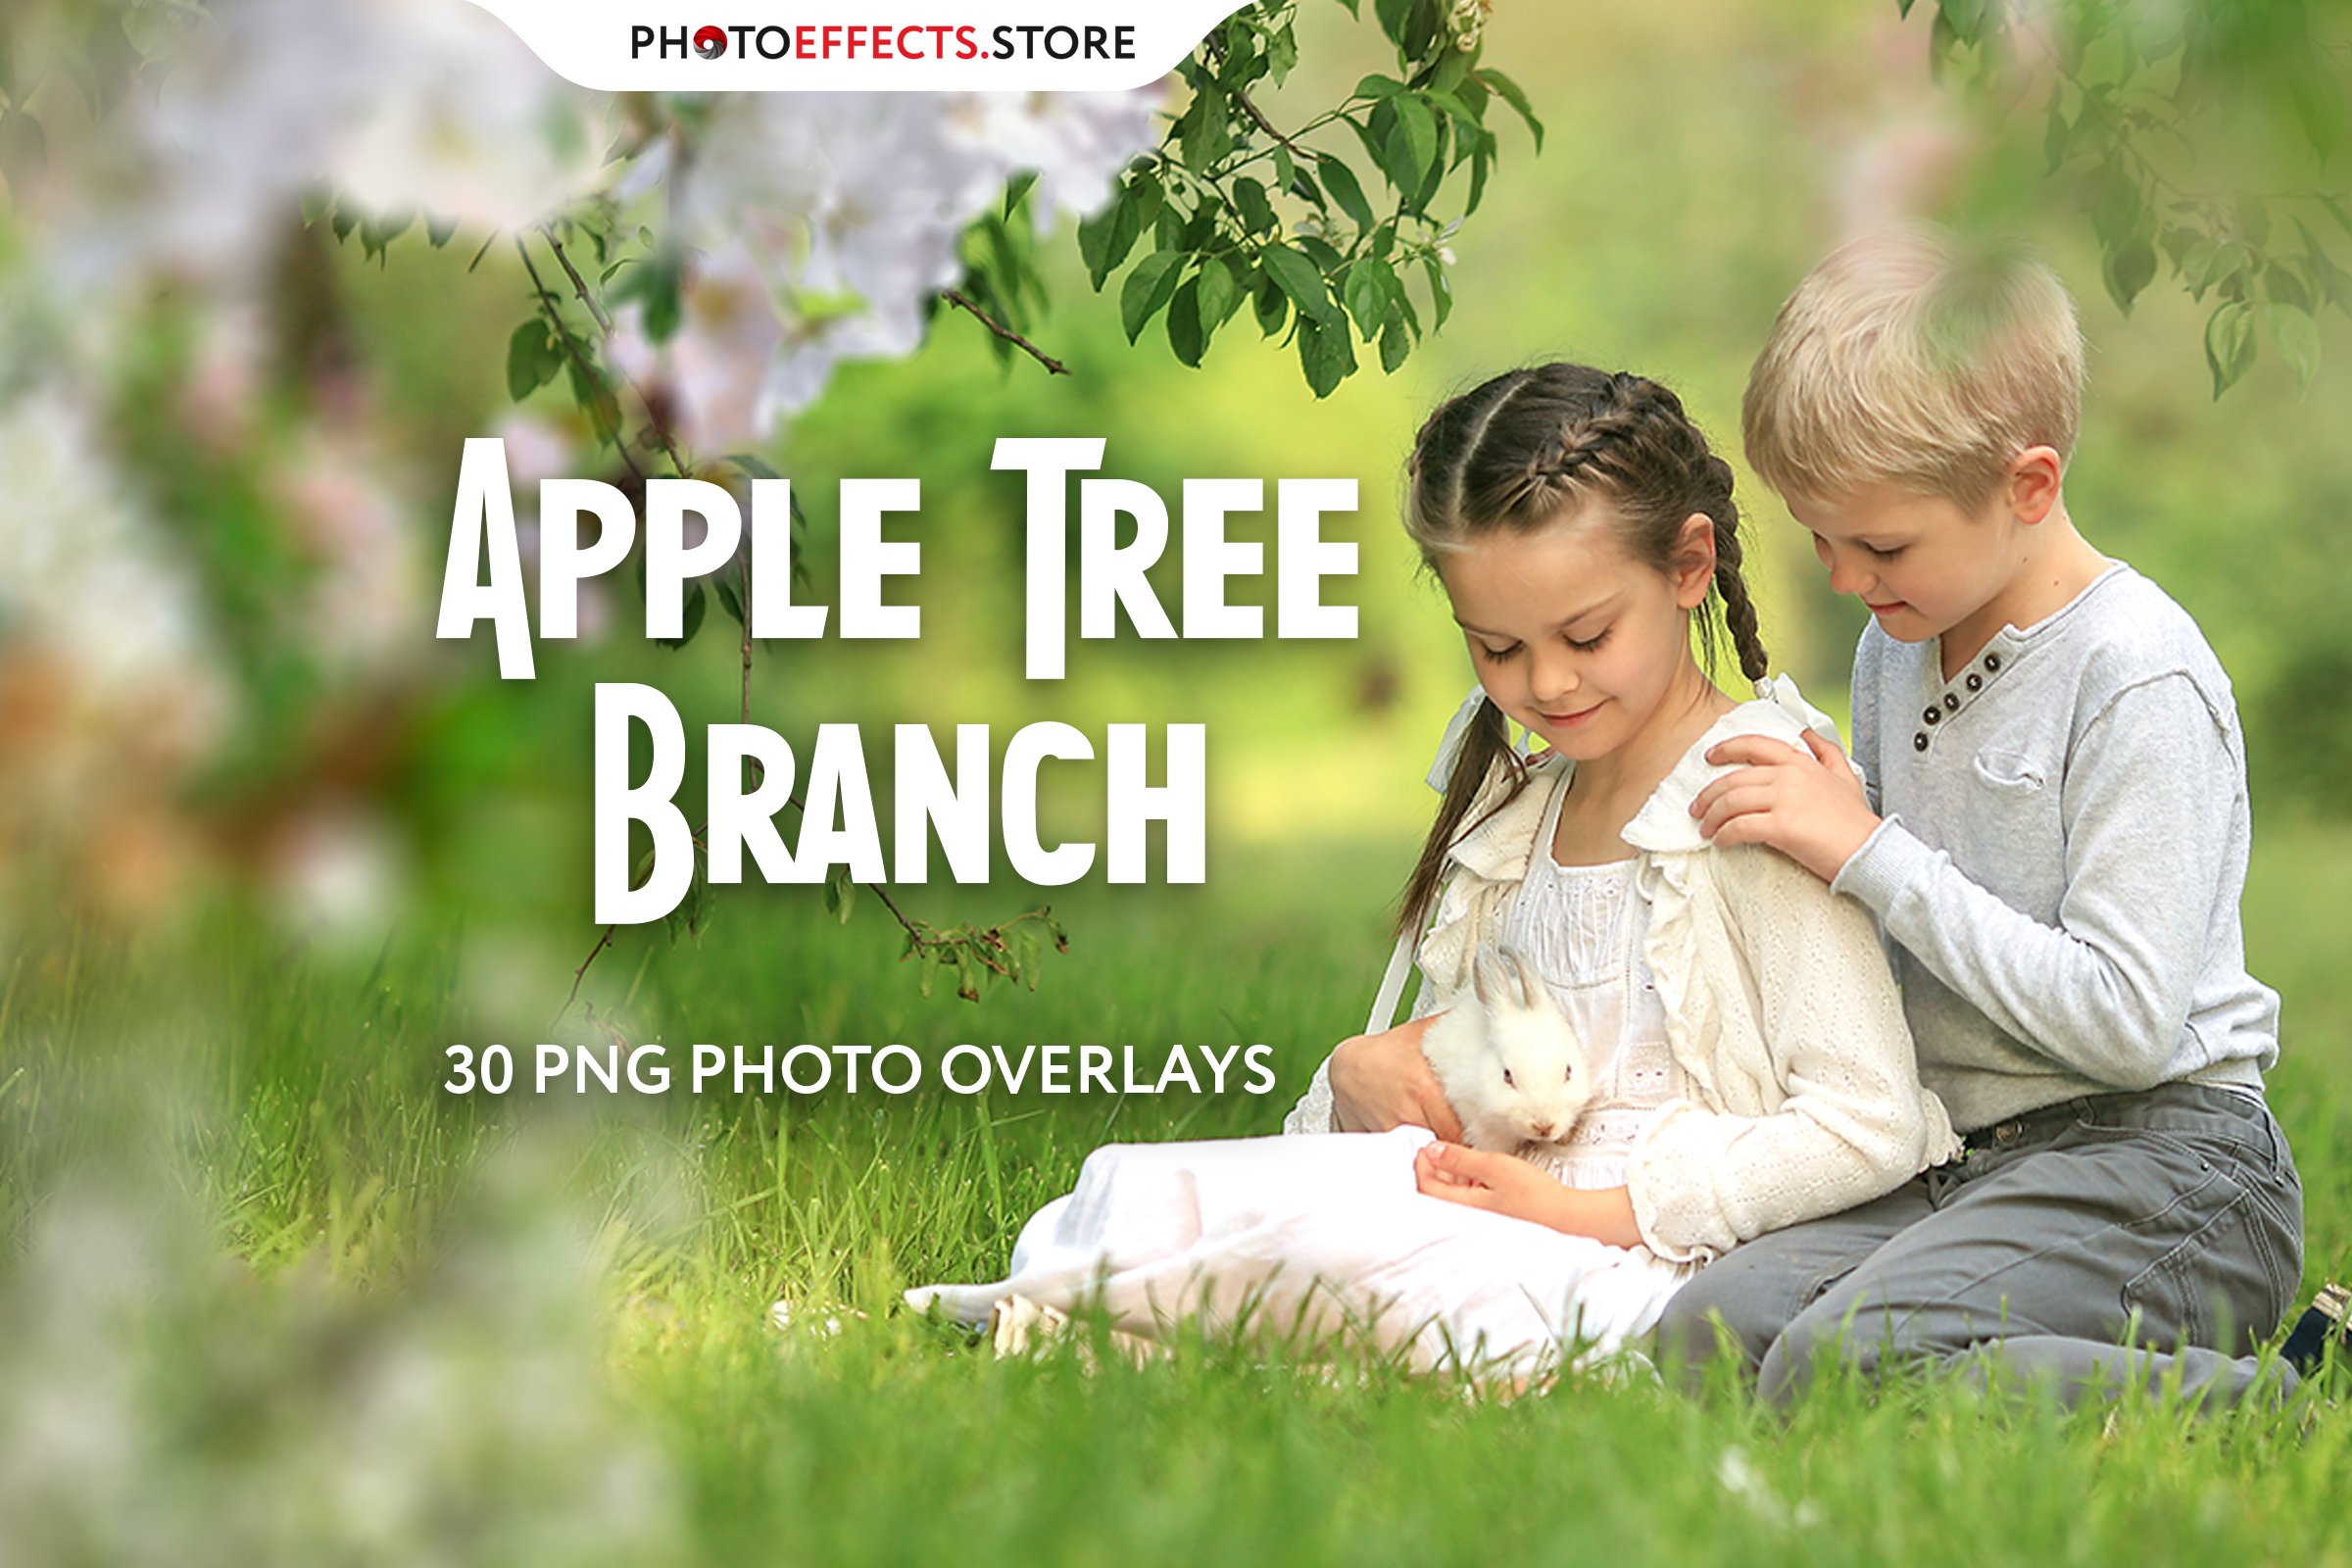 30 Apple Tree Branch Photo Overlayscover image.